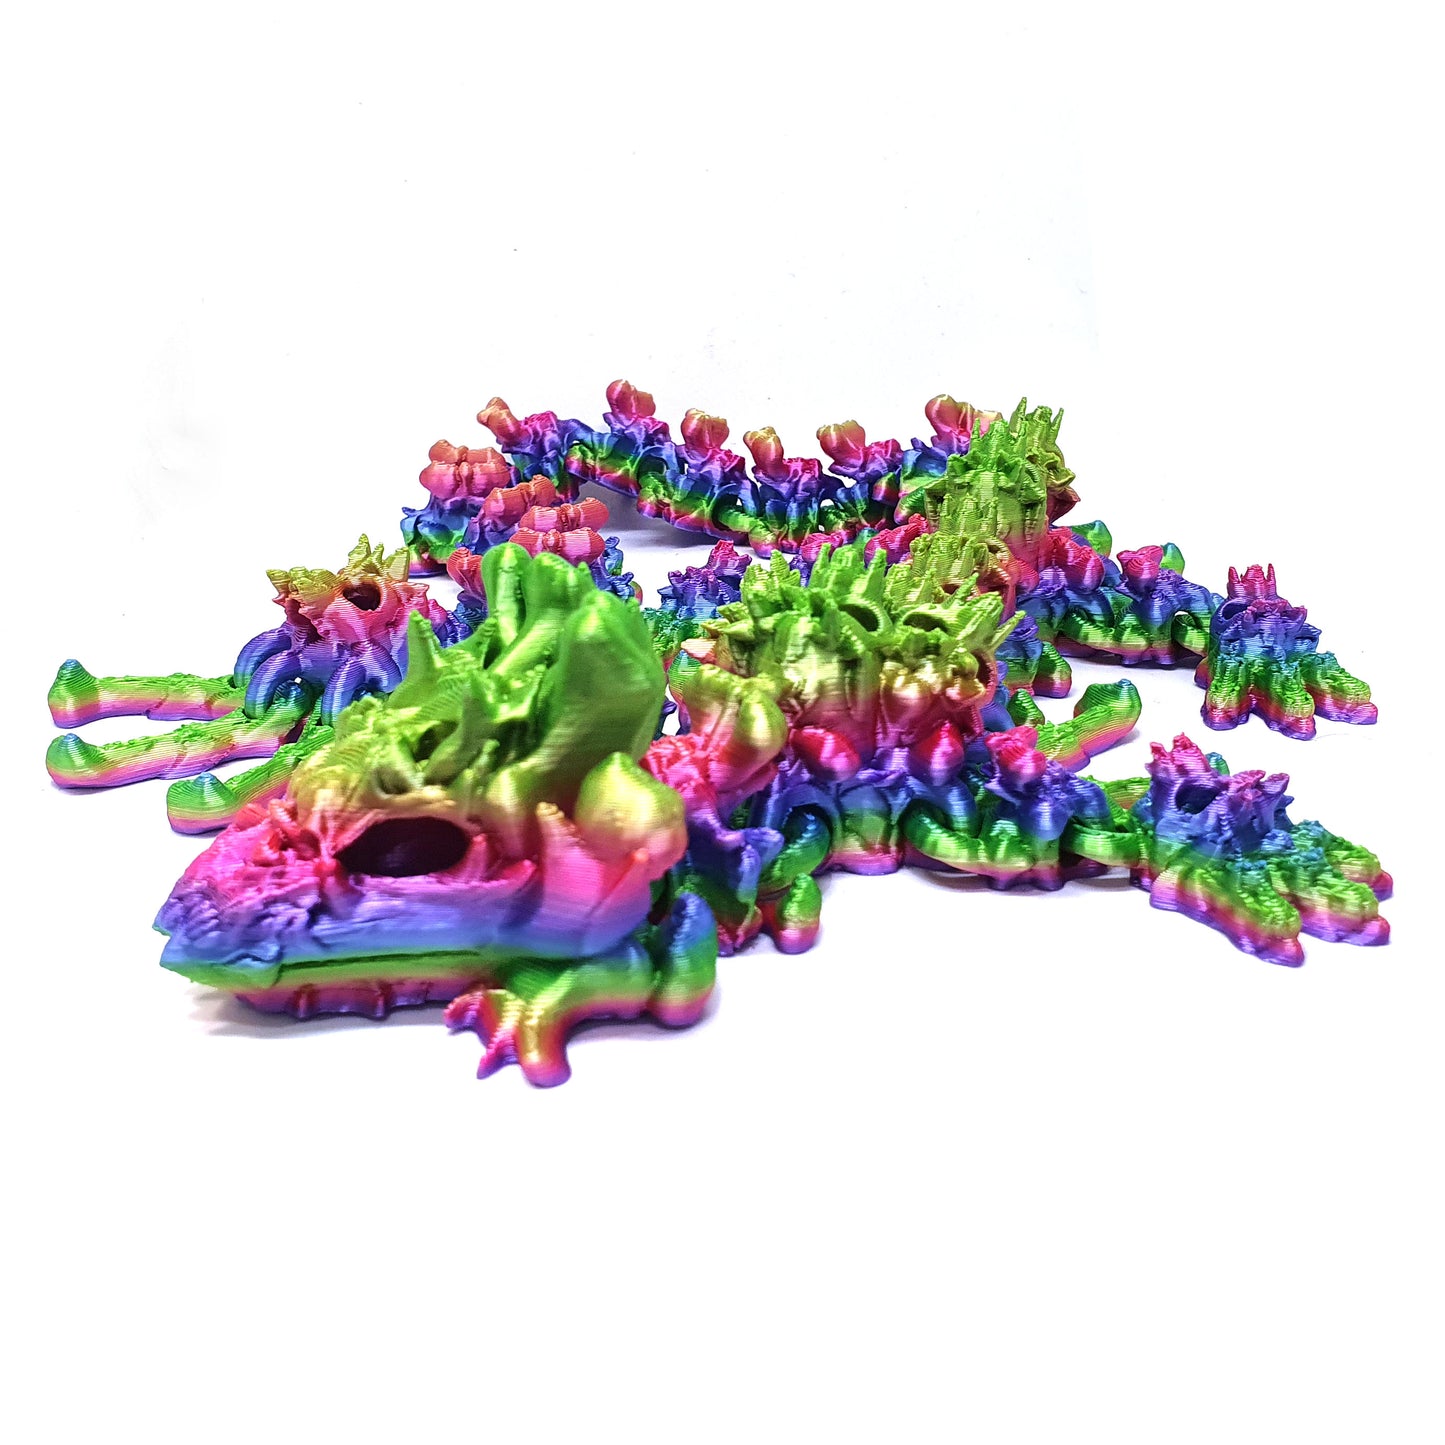 Hollow Articulated Baby Dragon